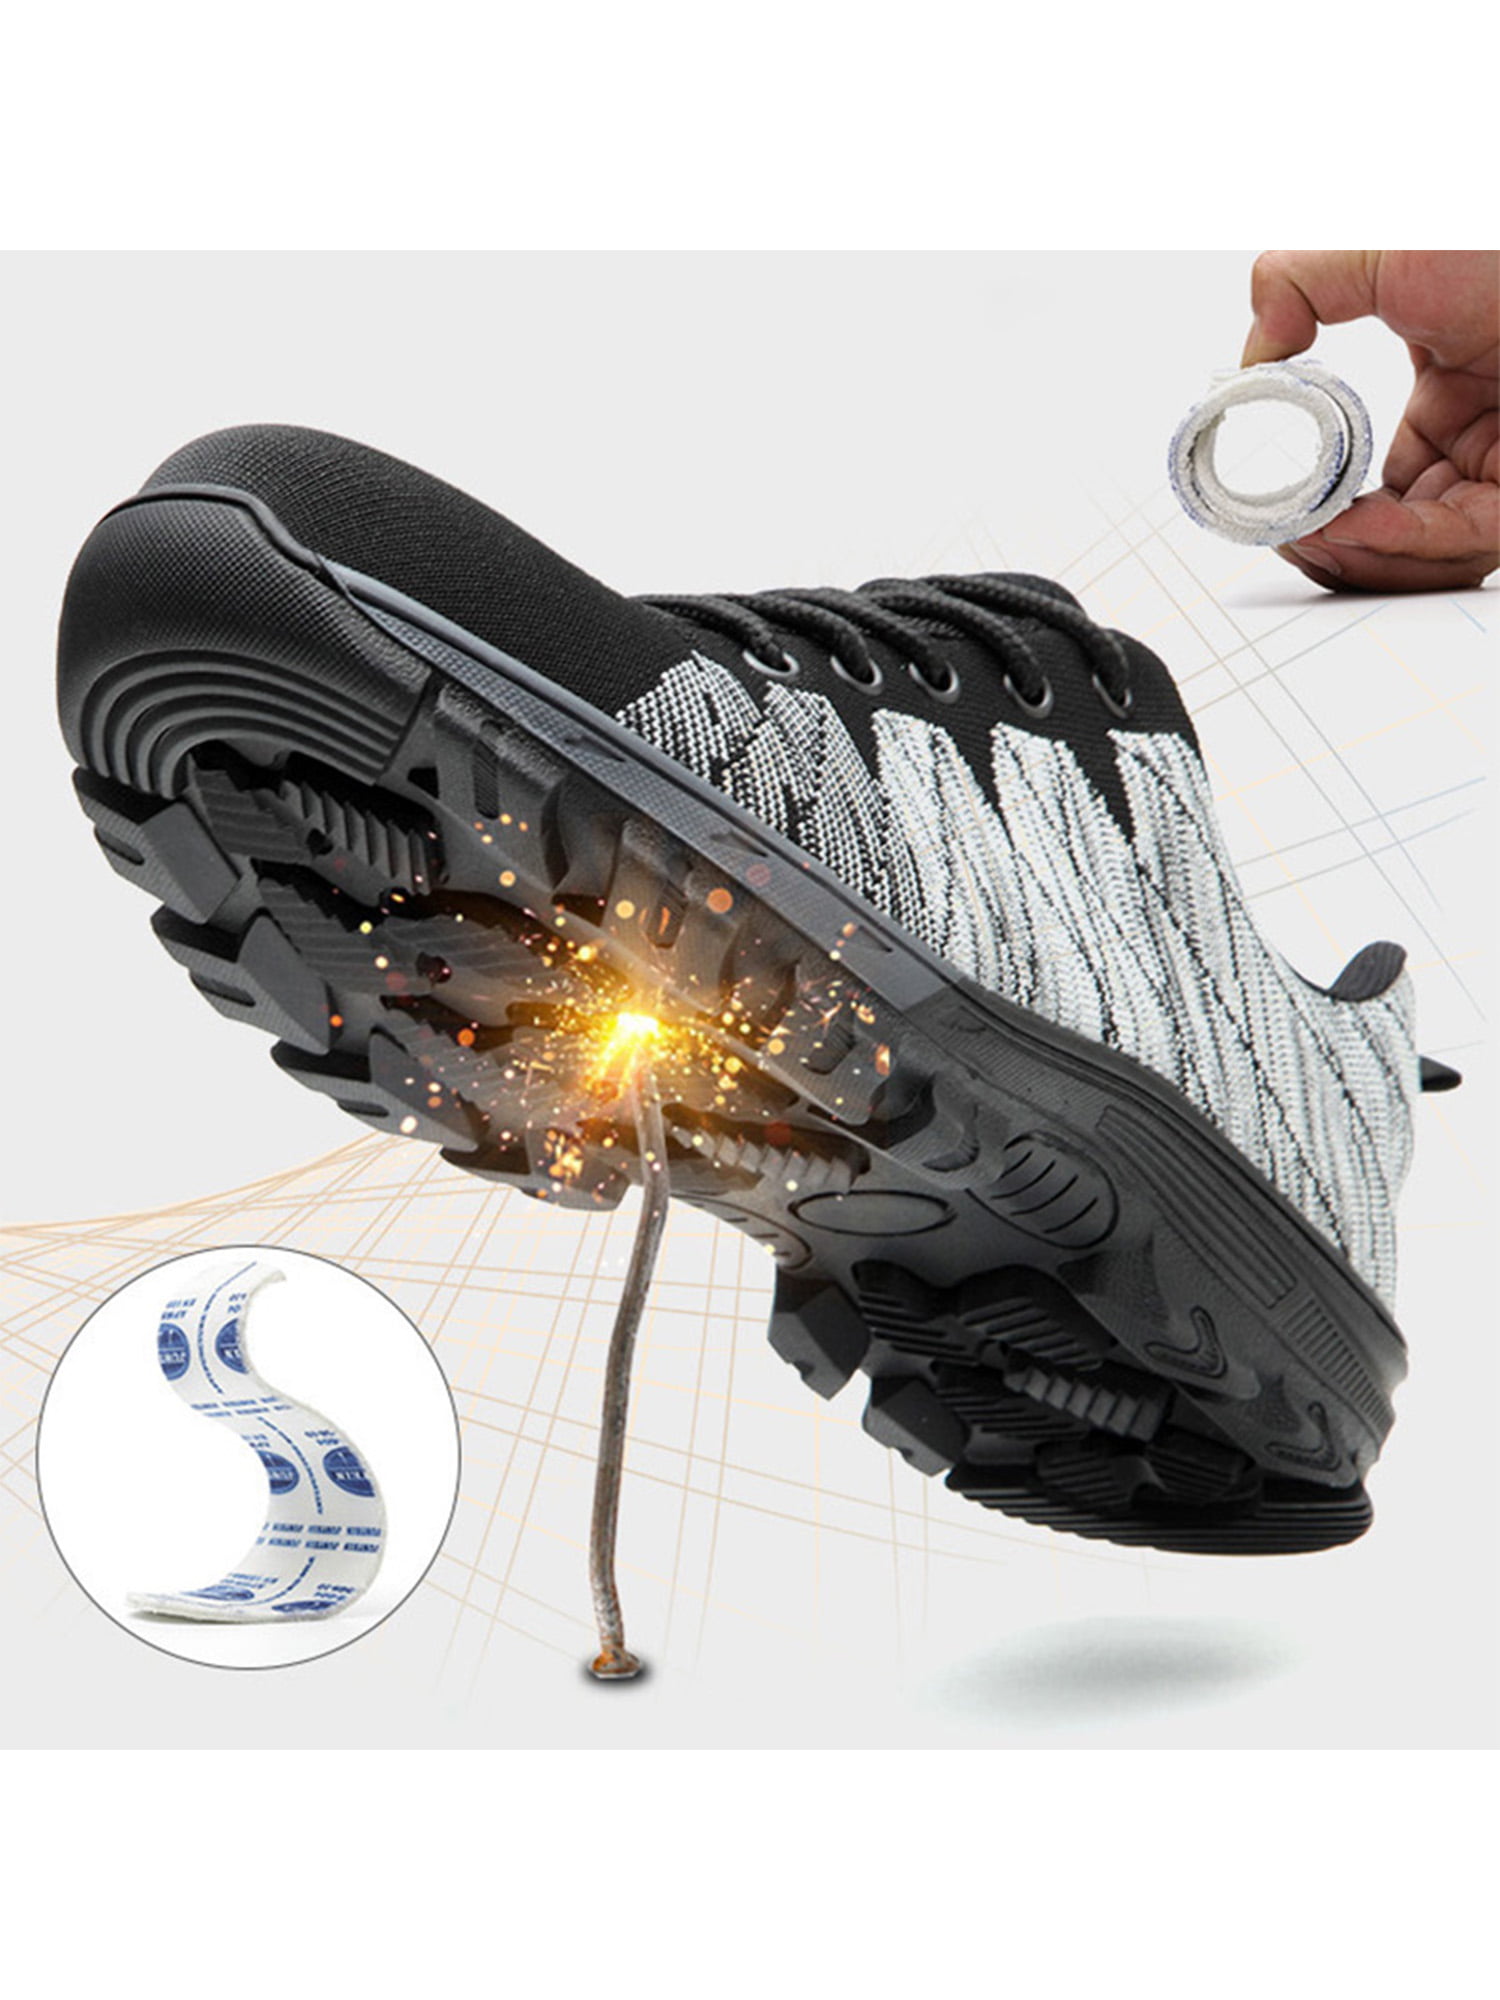 Details about   Mens Indestructible Safety Work Shoes Steel Toe Boots Lightweight Sneakers Sale 